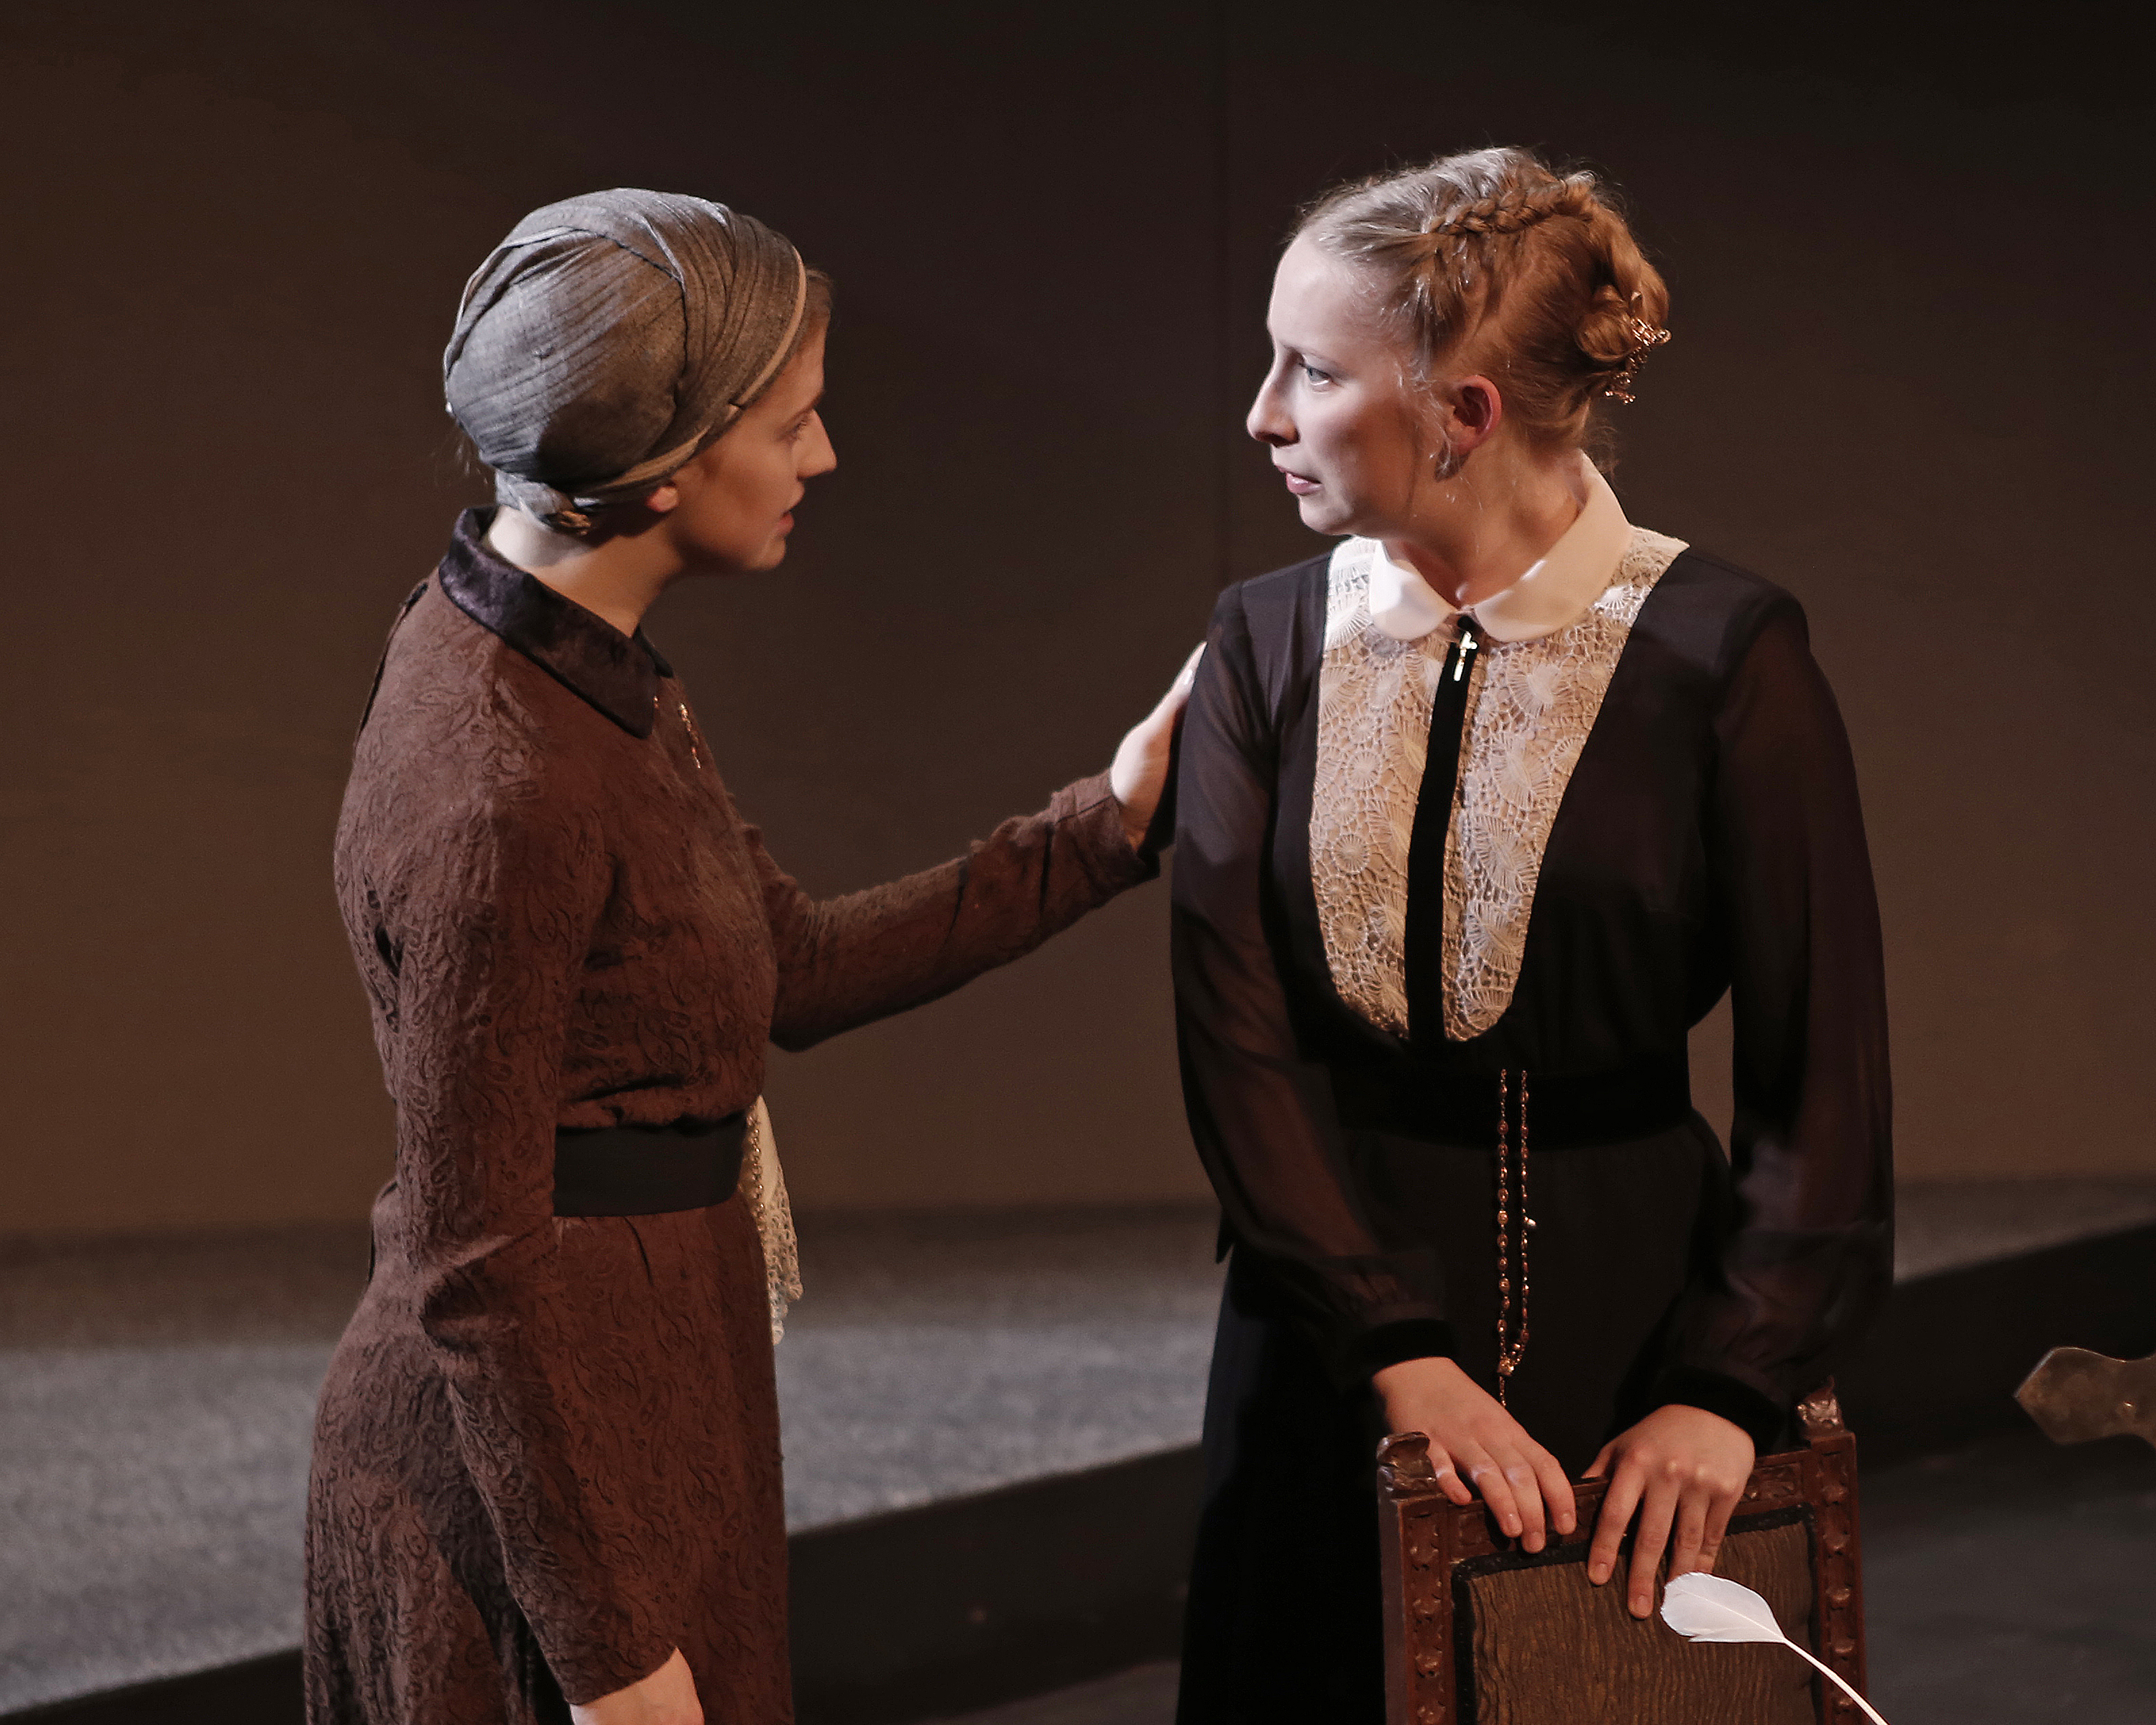 Students shine in production of Mary Stuart - The Dialog